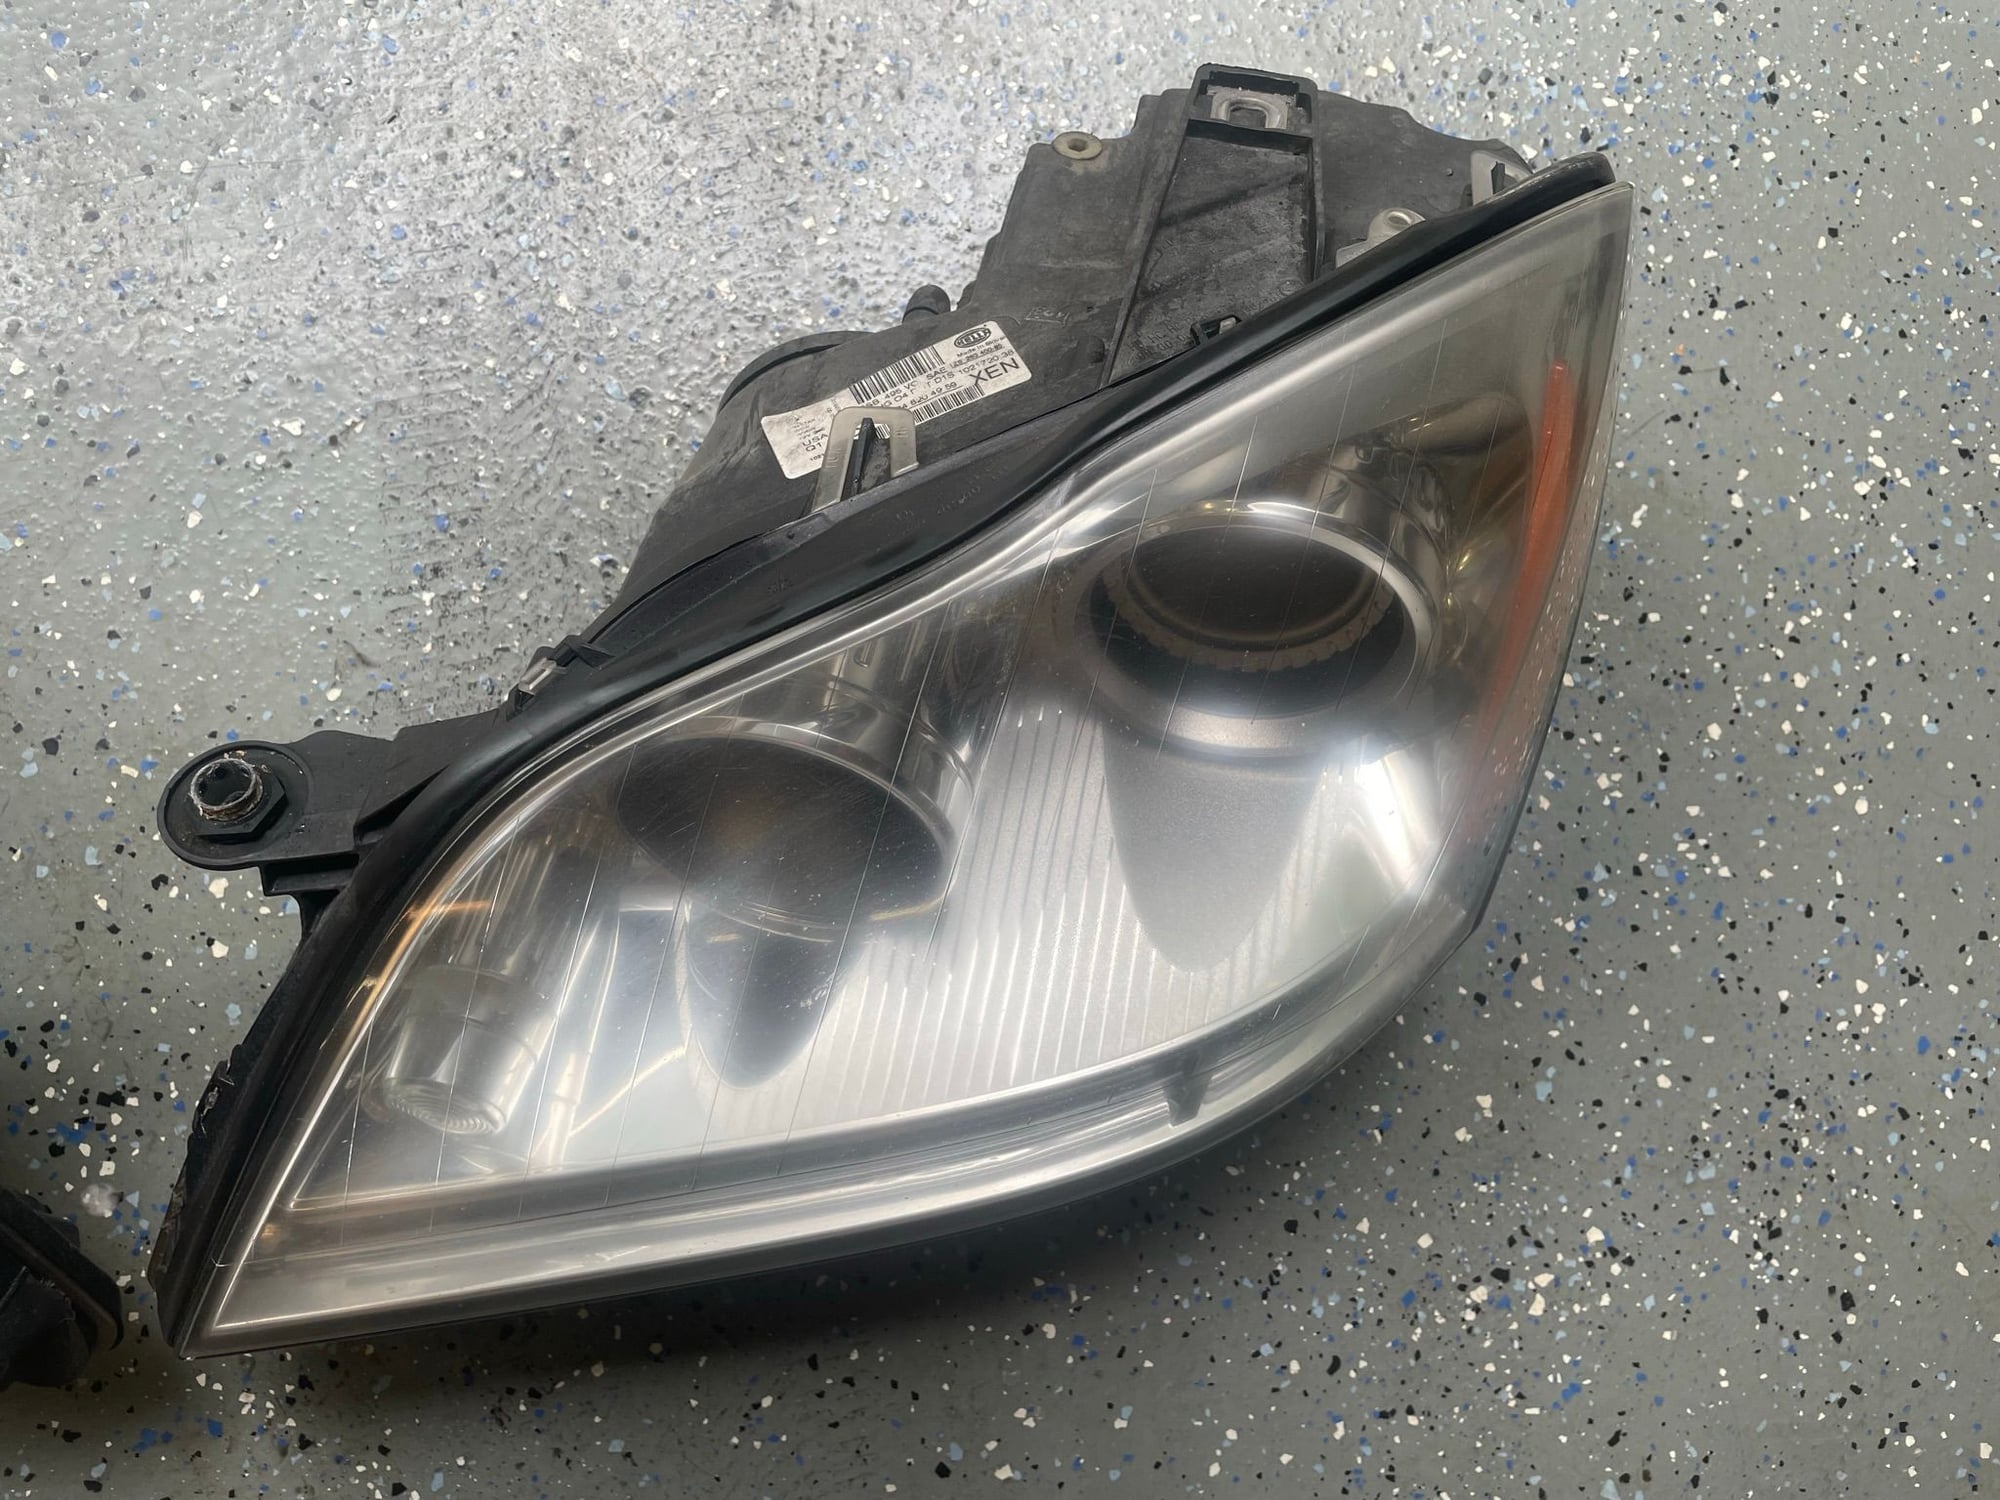 Lights - Mercedes Benz X164 Xenon Headlights 100% working condition Used - Used - 2010 to 2012 Mercedes-Benz GL550 - Chesterfield, VA 23838, United States